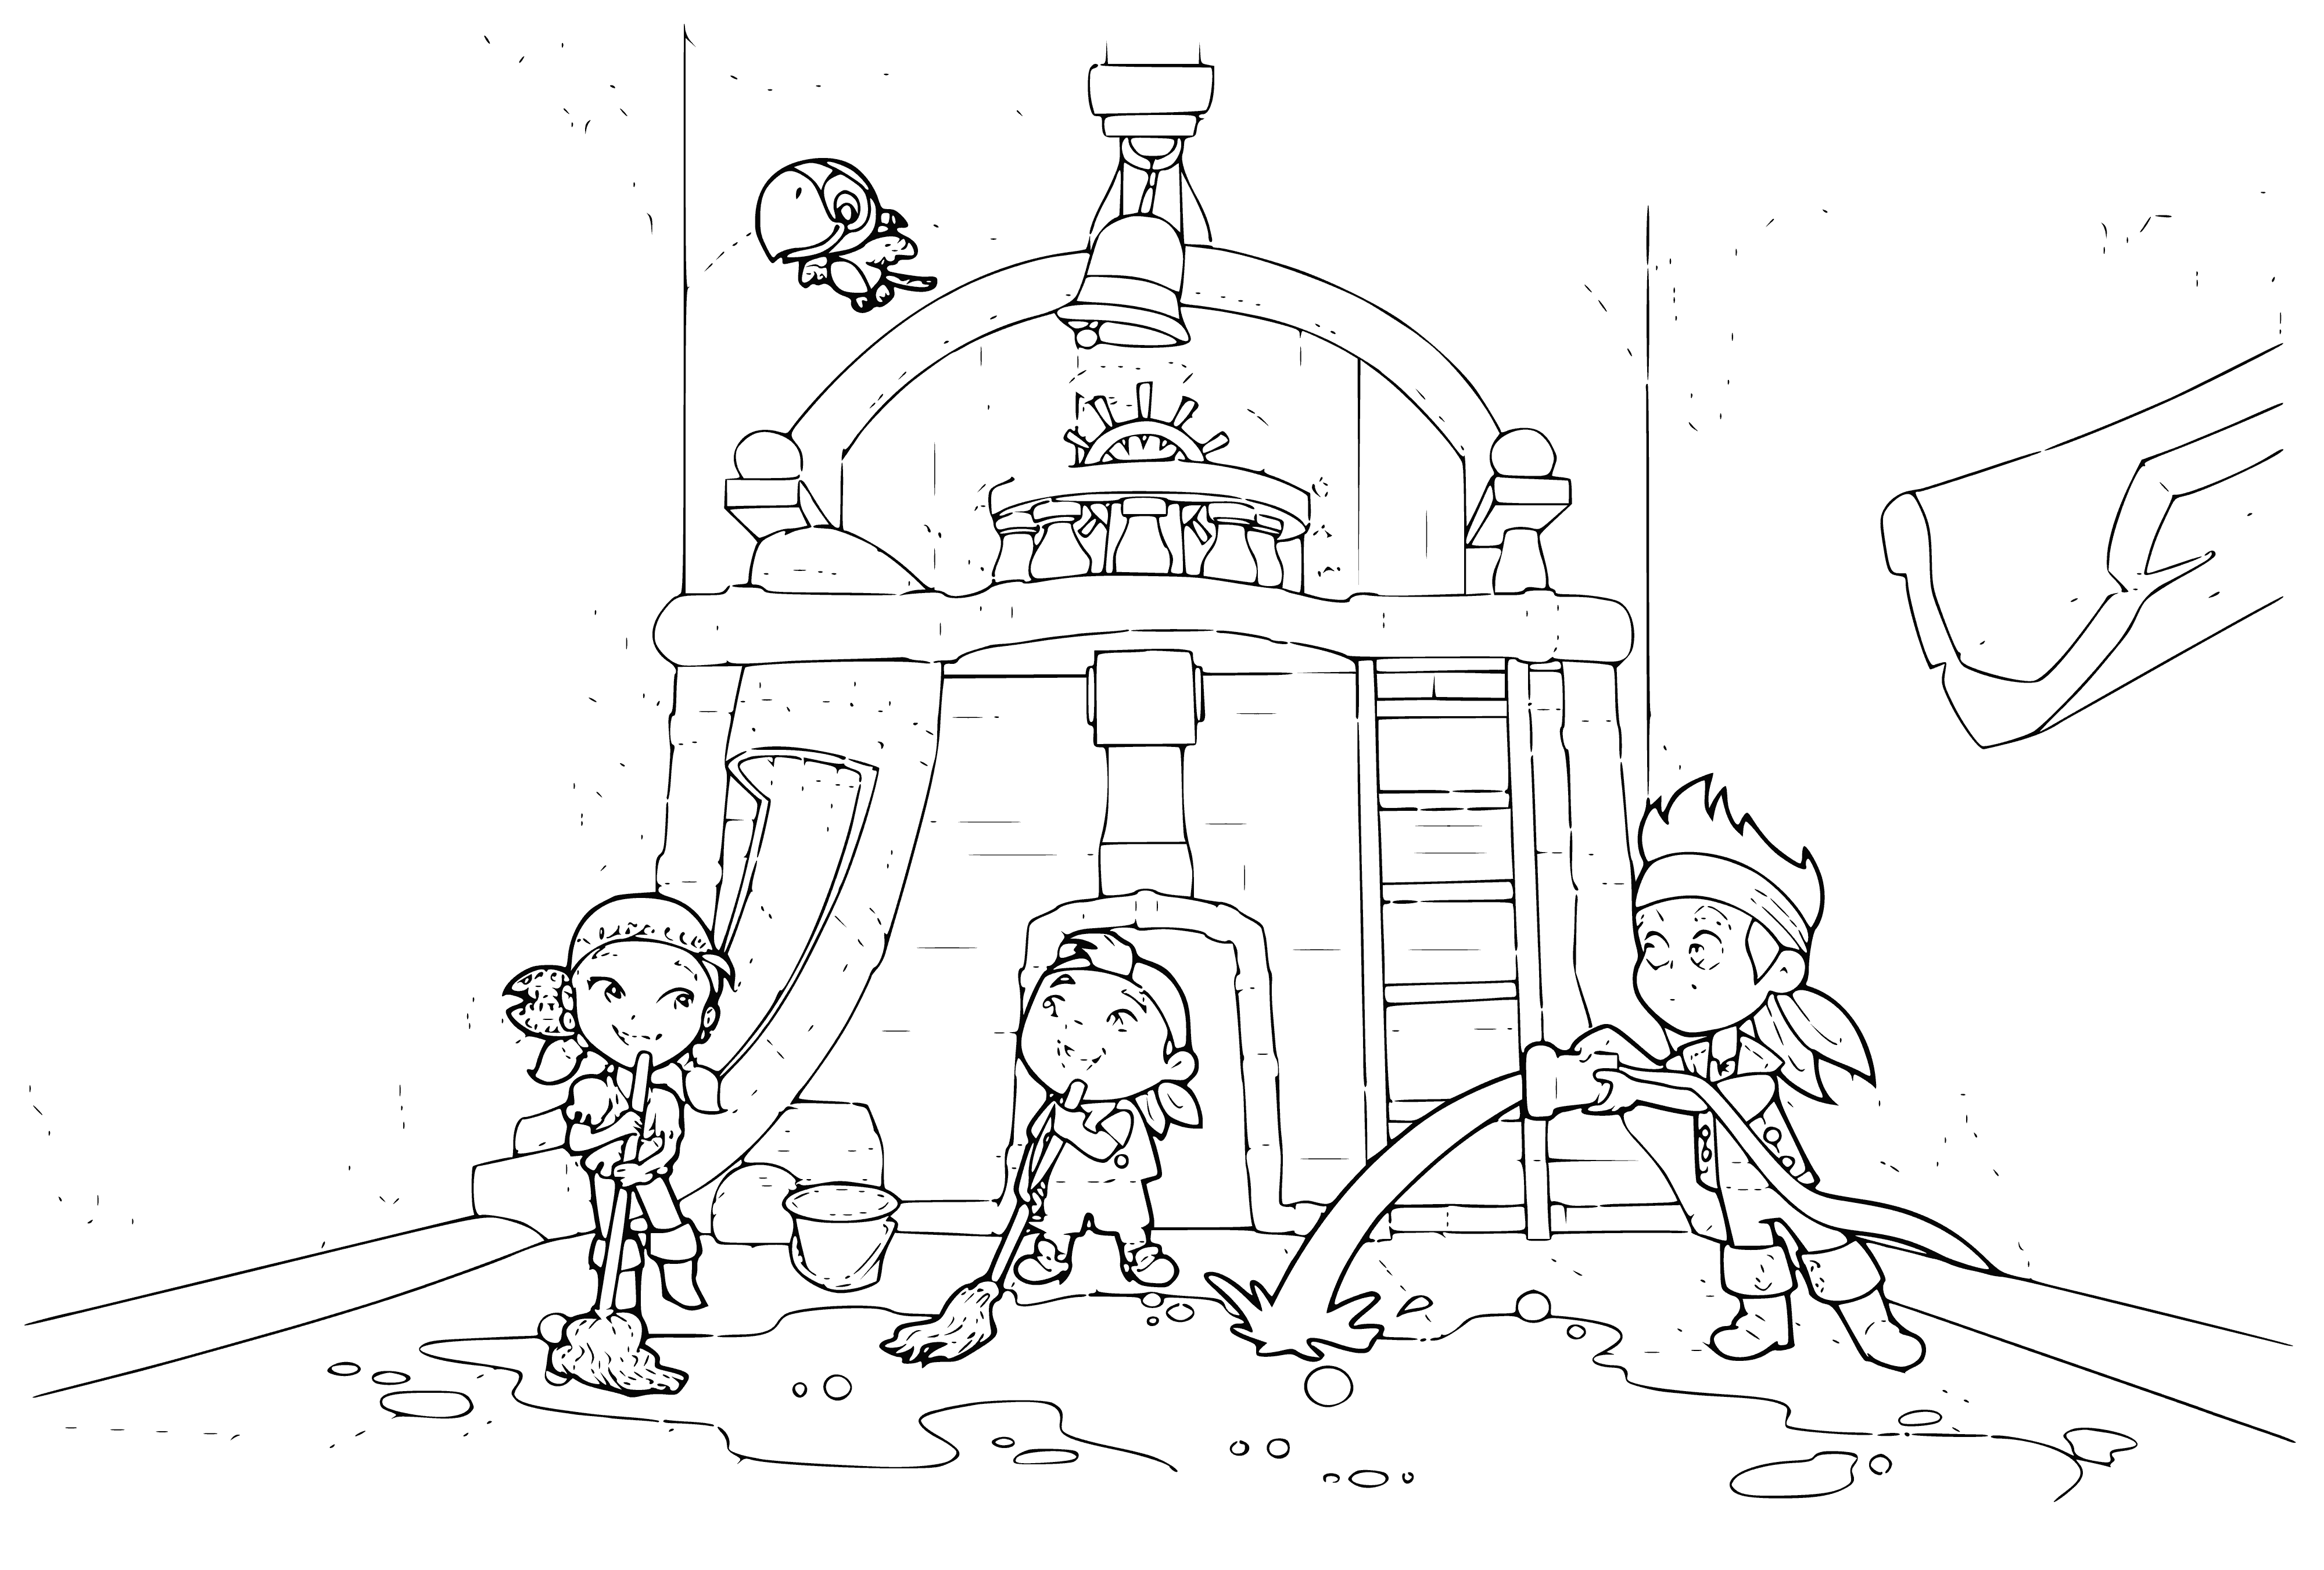 coloring page: Jake and crew scrubbing the deck of the Never Land Pirate Ship with a brush, cloths, water & sponge.